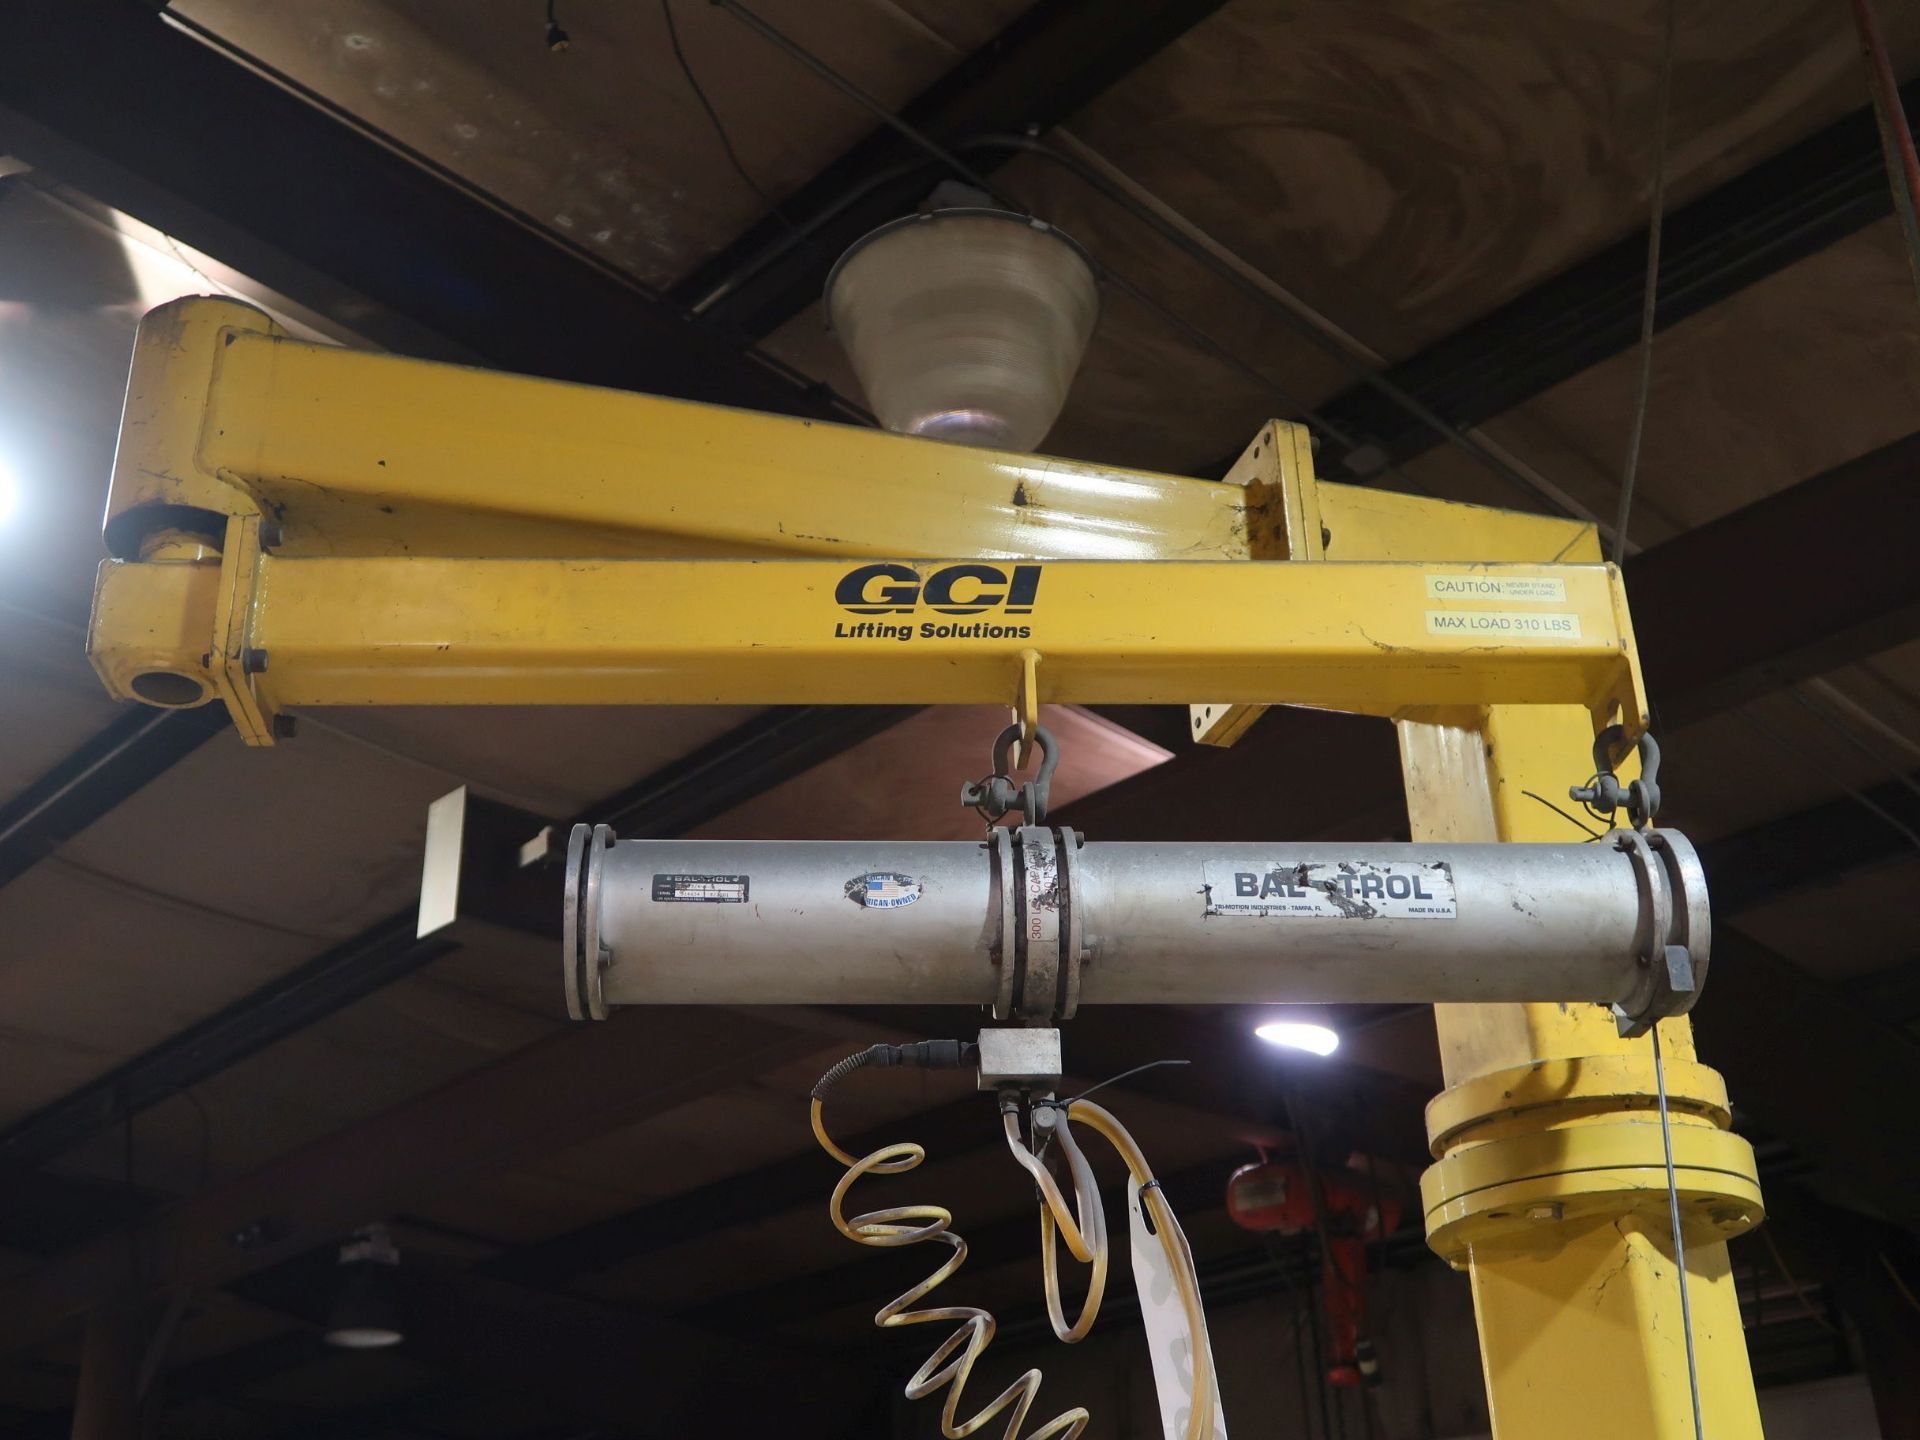 310 MAX GCI LIFTING SOLUTIONS SWING ARM FLOOR MOUNT ROTATING JIB CARNE WITH BAL-TROL PNEUMATIC CABLE - Image 2 of 3